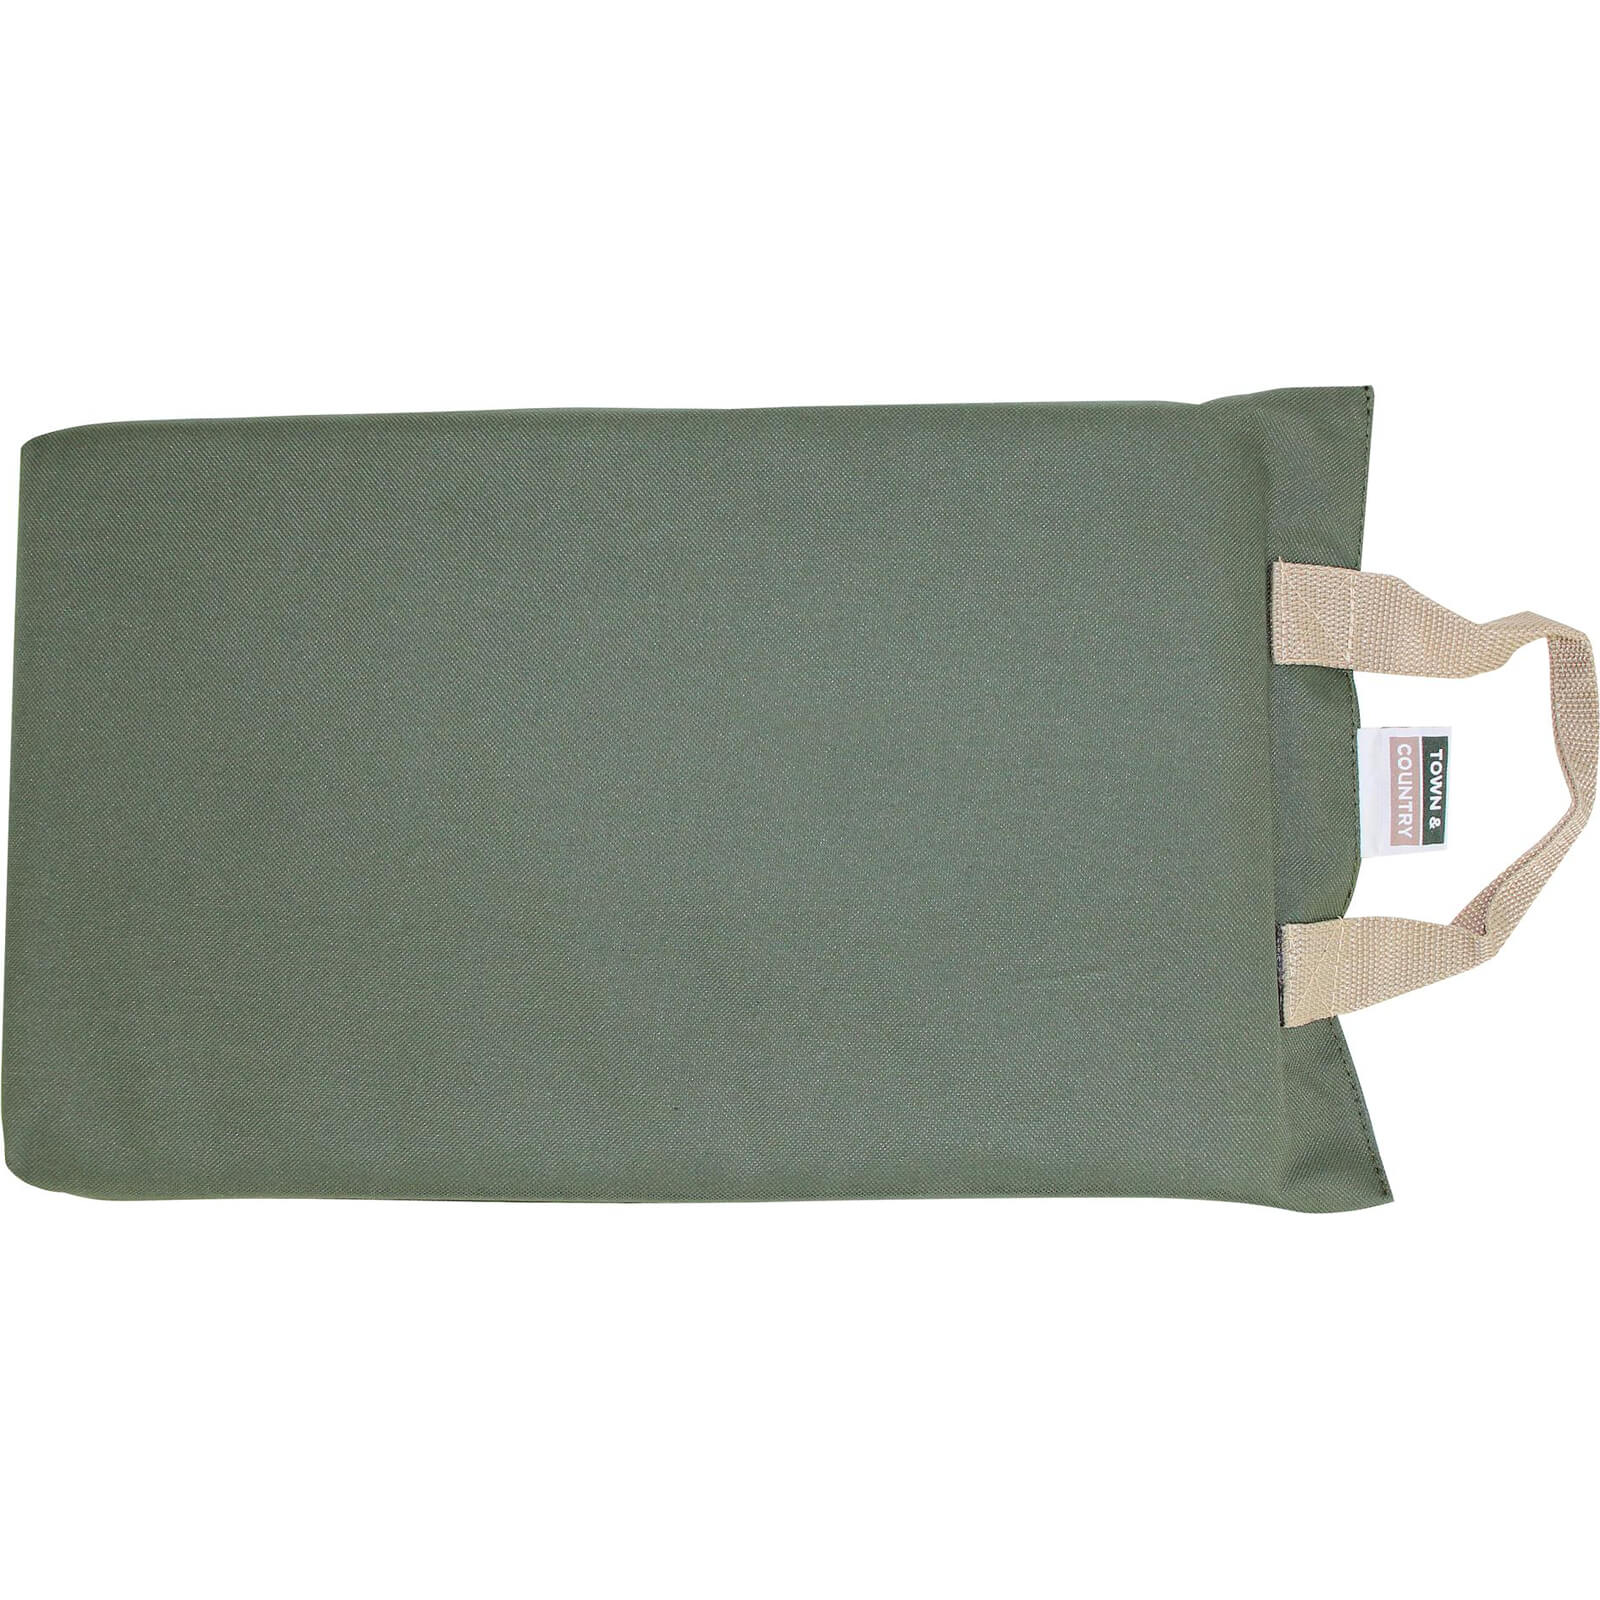 Photo of Town And Country Garden Kneeler Pad